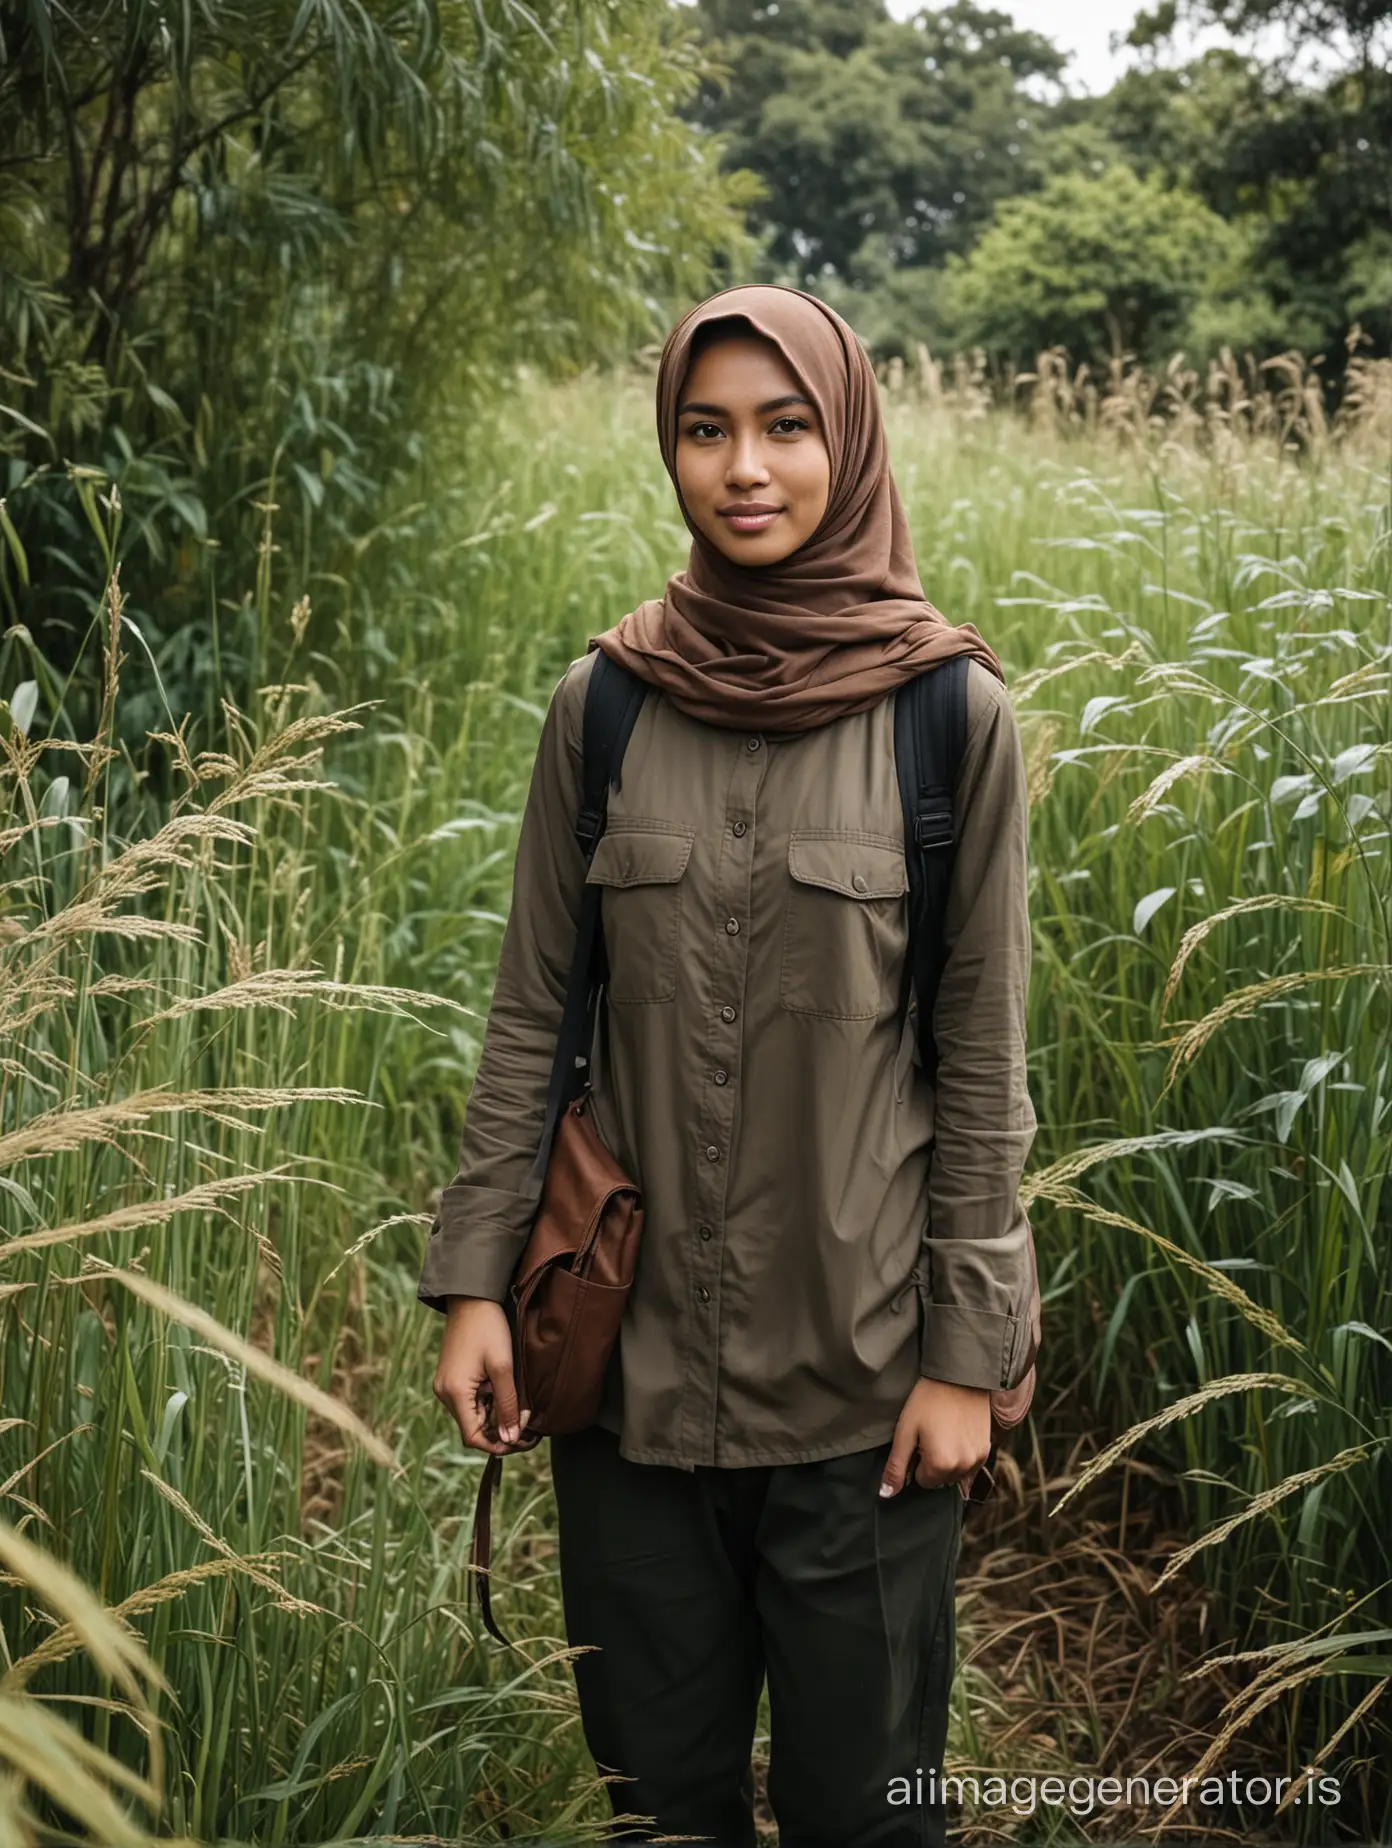 A 30 year old Indonesian woman stands in the middle of tall grass, surrounded by lush trees, wearing a hijab, dark colored jacket and trousers, carrying a brown backpack, looking at the camera